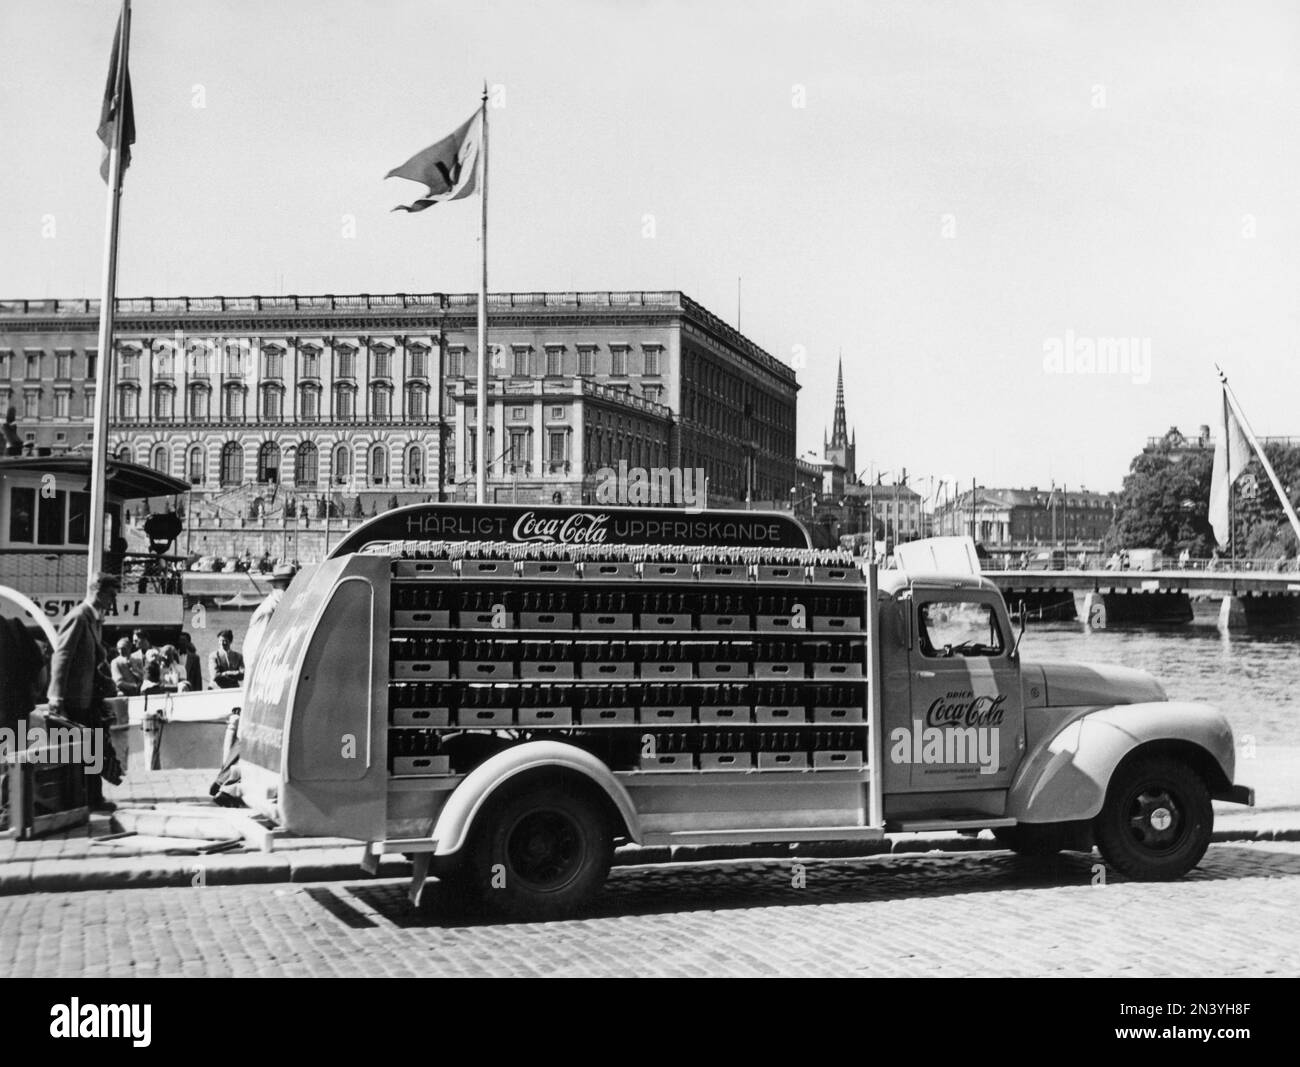 Coca cola in the 1950s. In 1 january 1953 Coca-Cola was first allowed to be manufactured and sold in Sweden, previously being restricted from sales in Sweden since the content of Coca-cola included forbidden substances like phosphoric acid and caffeine. One of the first  distribution trucks of the brewery Mineralvattenfabriken Tre Kronor loaded with Coca-Cola bottles pictured in Stockholm with the royal castle in the background. Volvo trucks model L34 modifyed and painted in red for the exclusive use on Coca-Cola trucks. Coca-Cola was early with having advertising on their vehicles. Sweden 195 Stock Photo